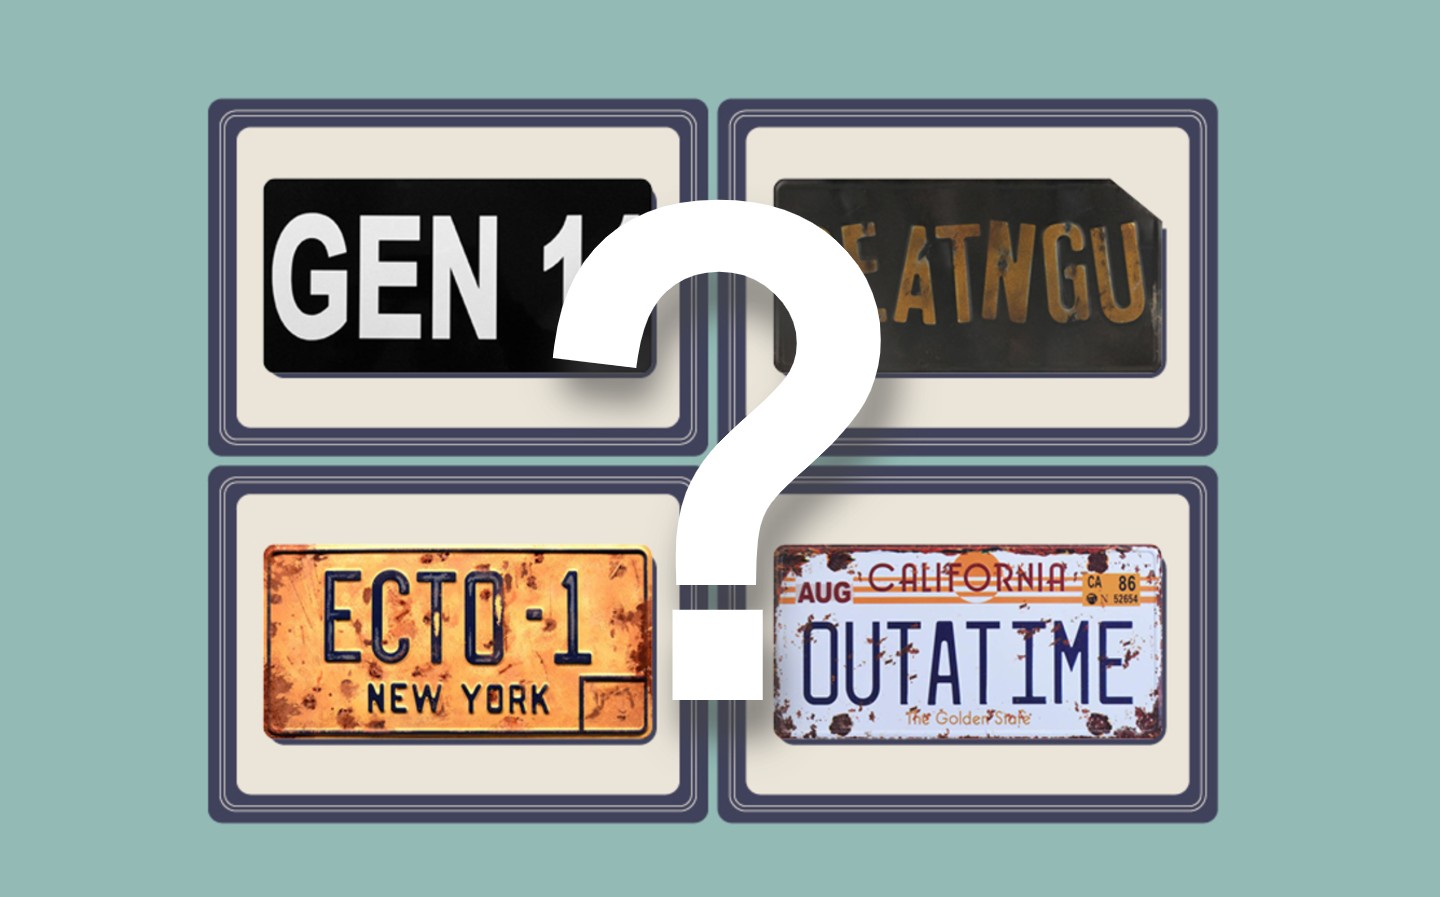 Quiz: Can you name these 15 movies from the car number plates?